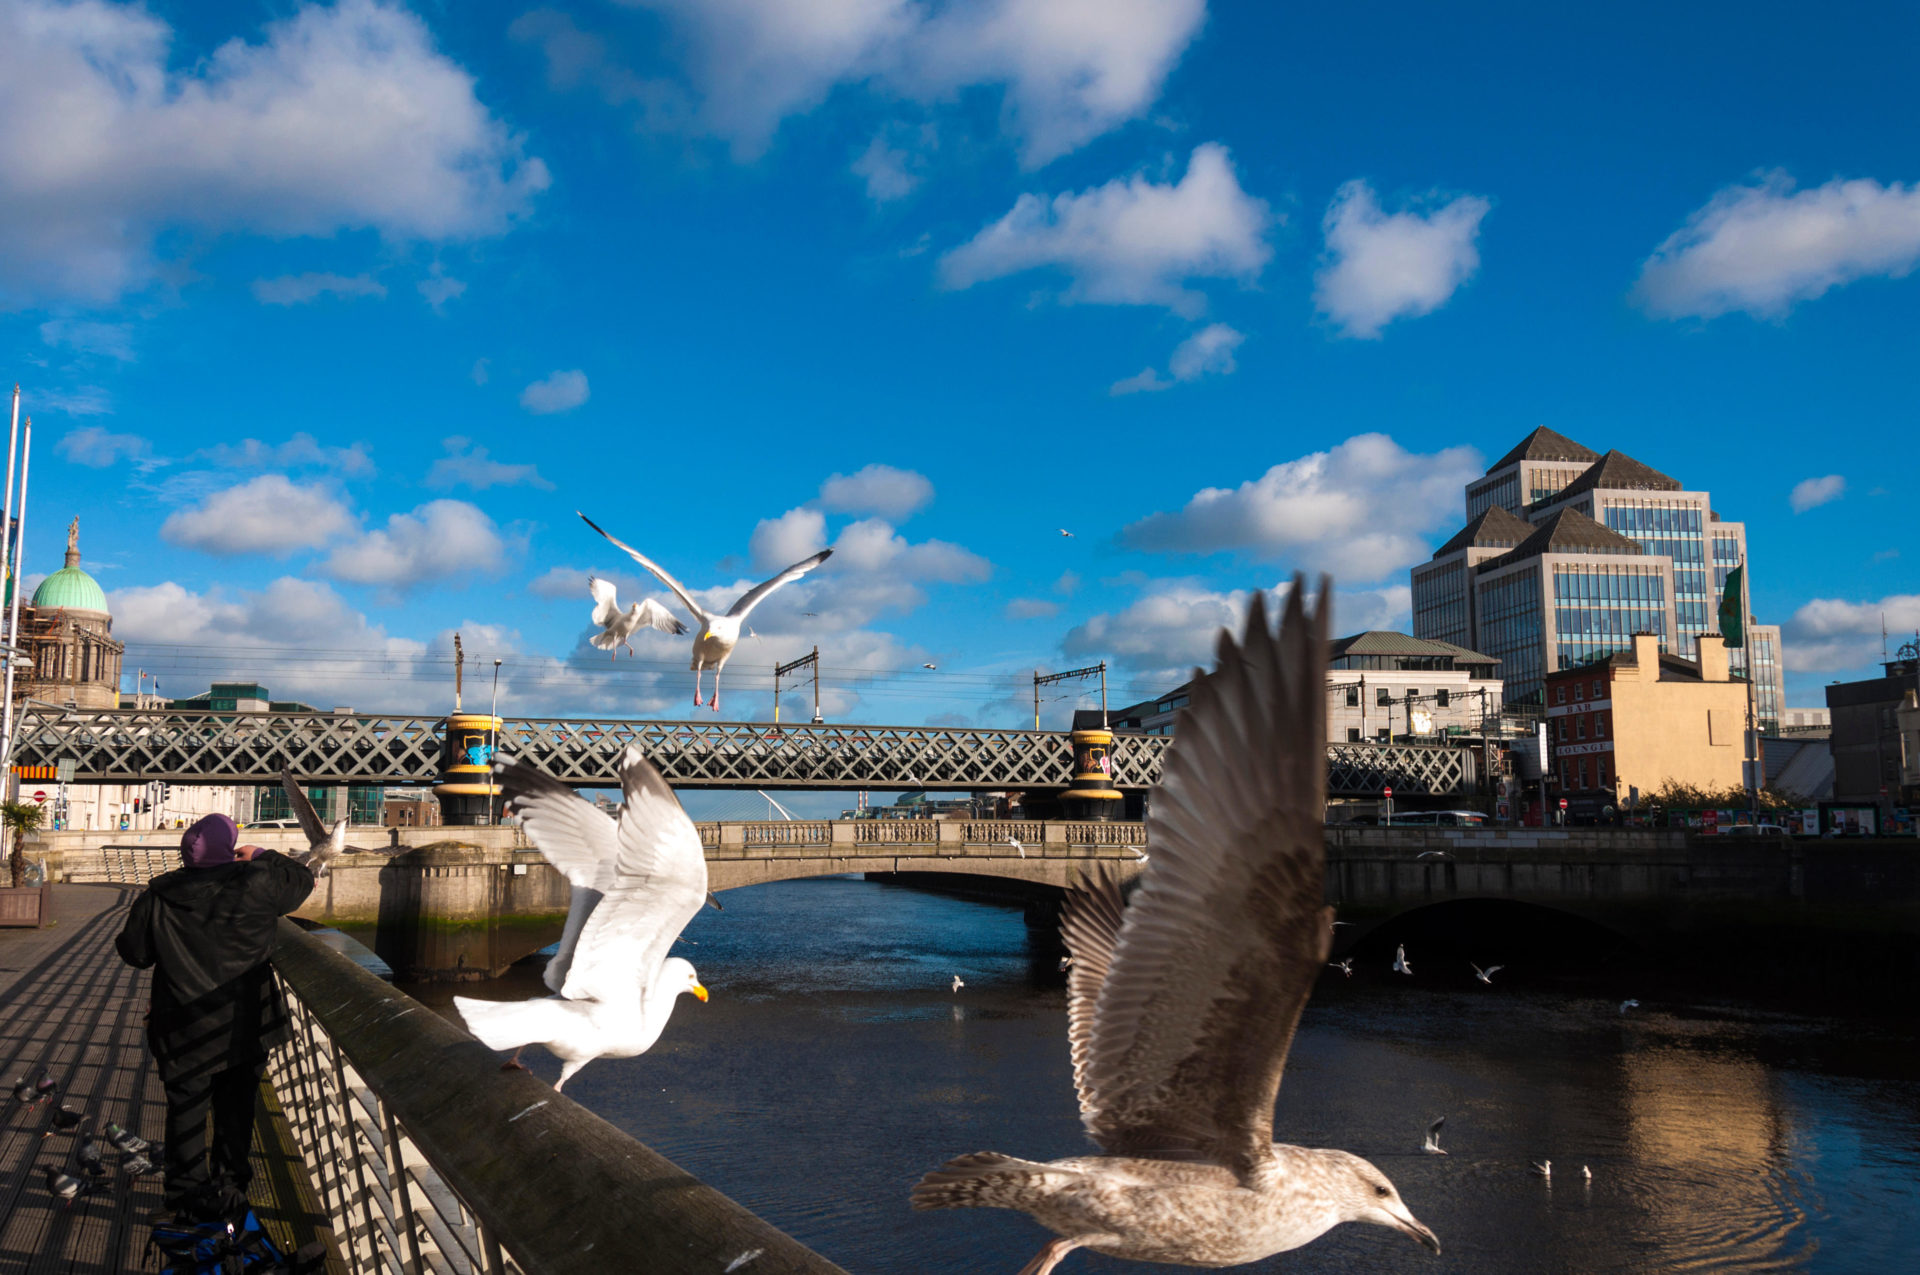 Seagulls are seen by the River Liffey in central Dublin in February 2016